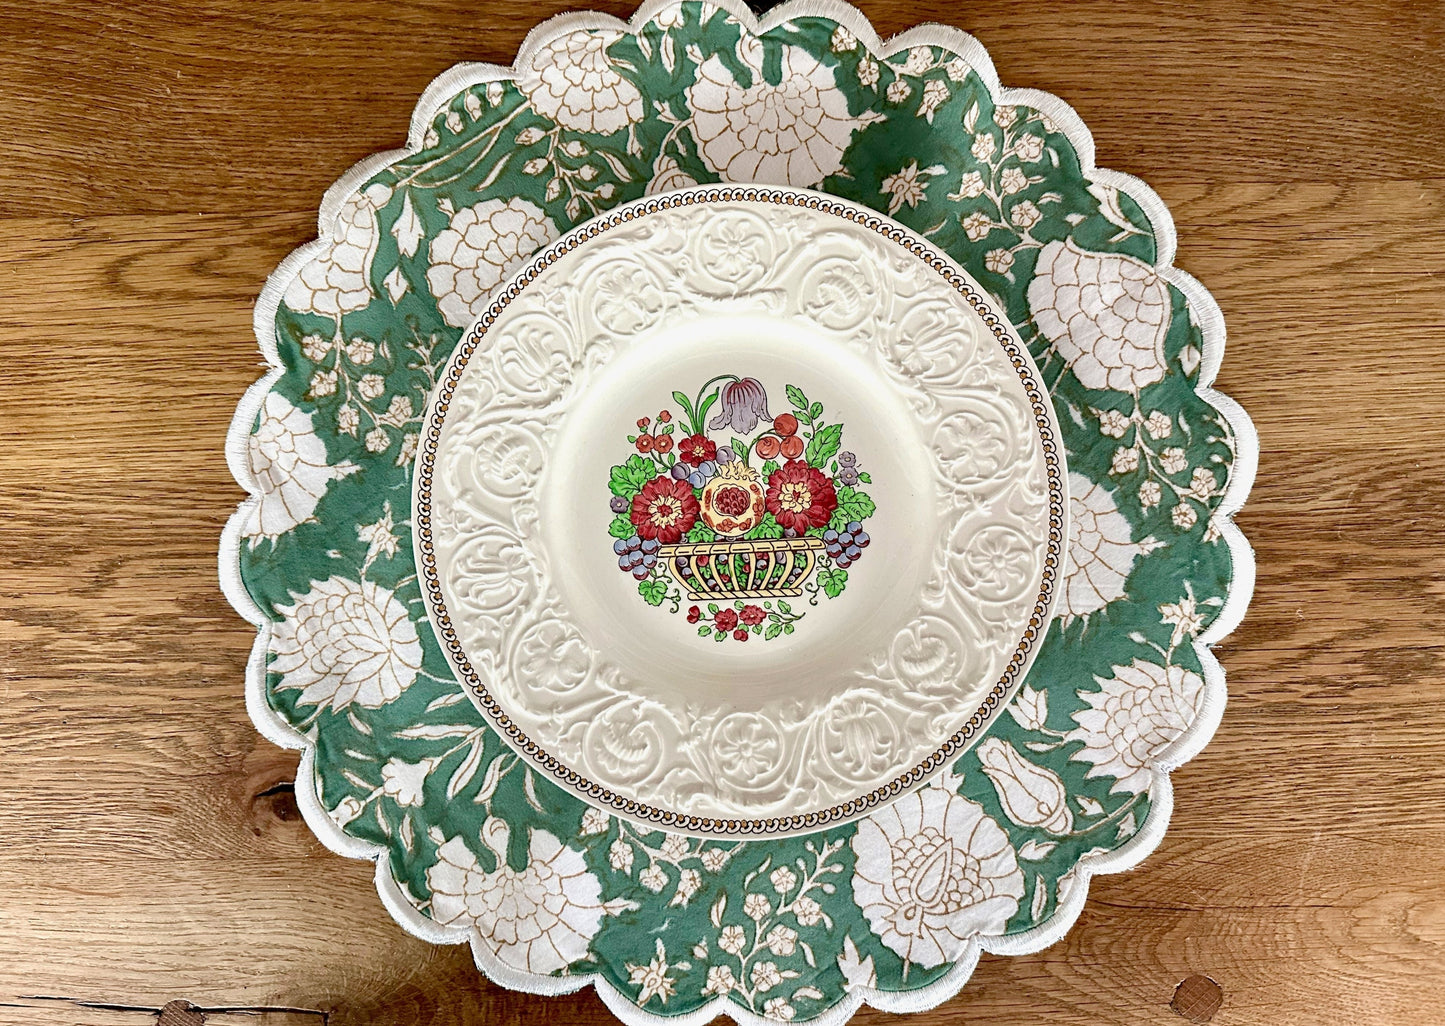 Green & White Round Scalloped Edge Embroidered Placemat I Table Mats I Cotton Placemat I Table Linen I Tablecloth - DharBazaar